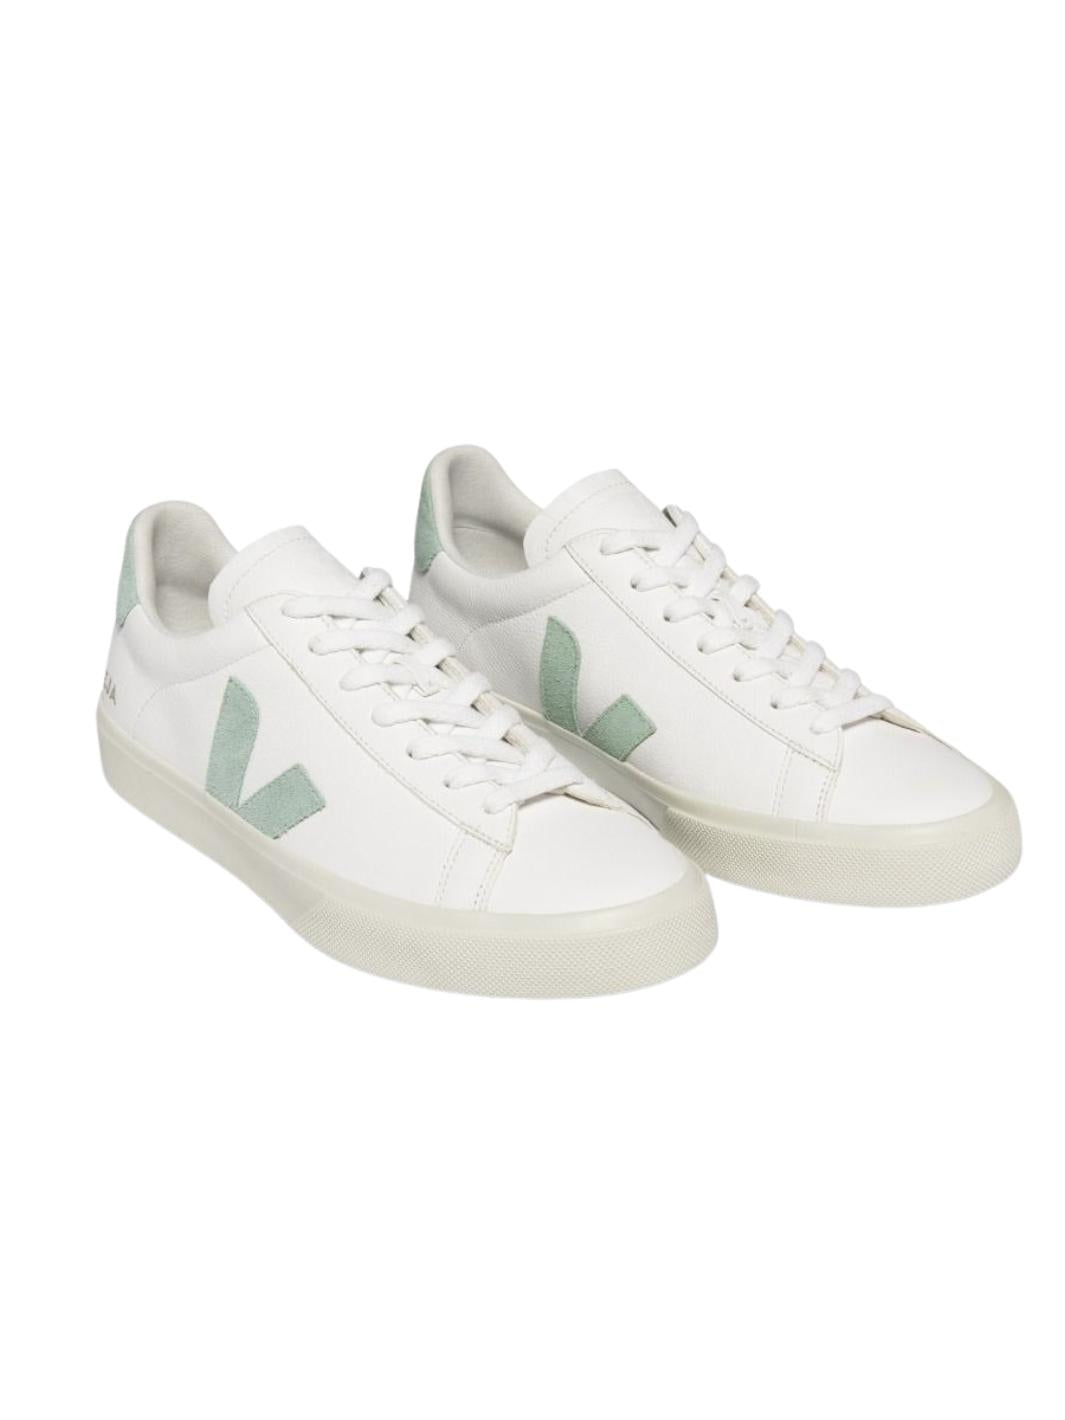 Veja Shoes Sneakers | Campo Chromefree Matcha